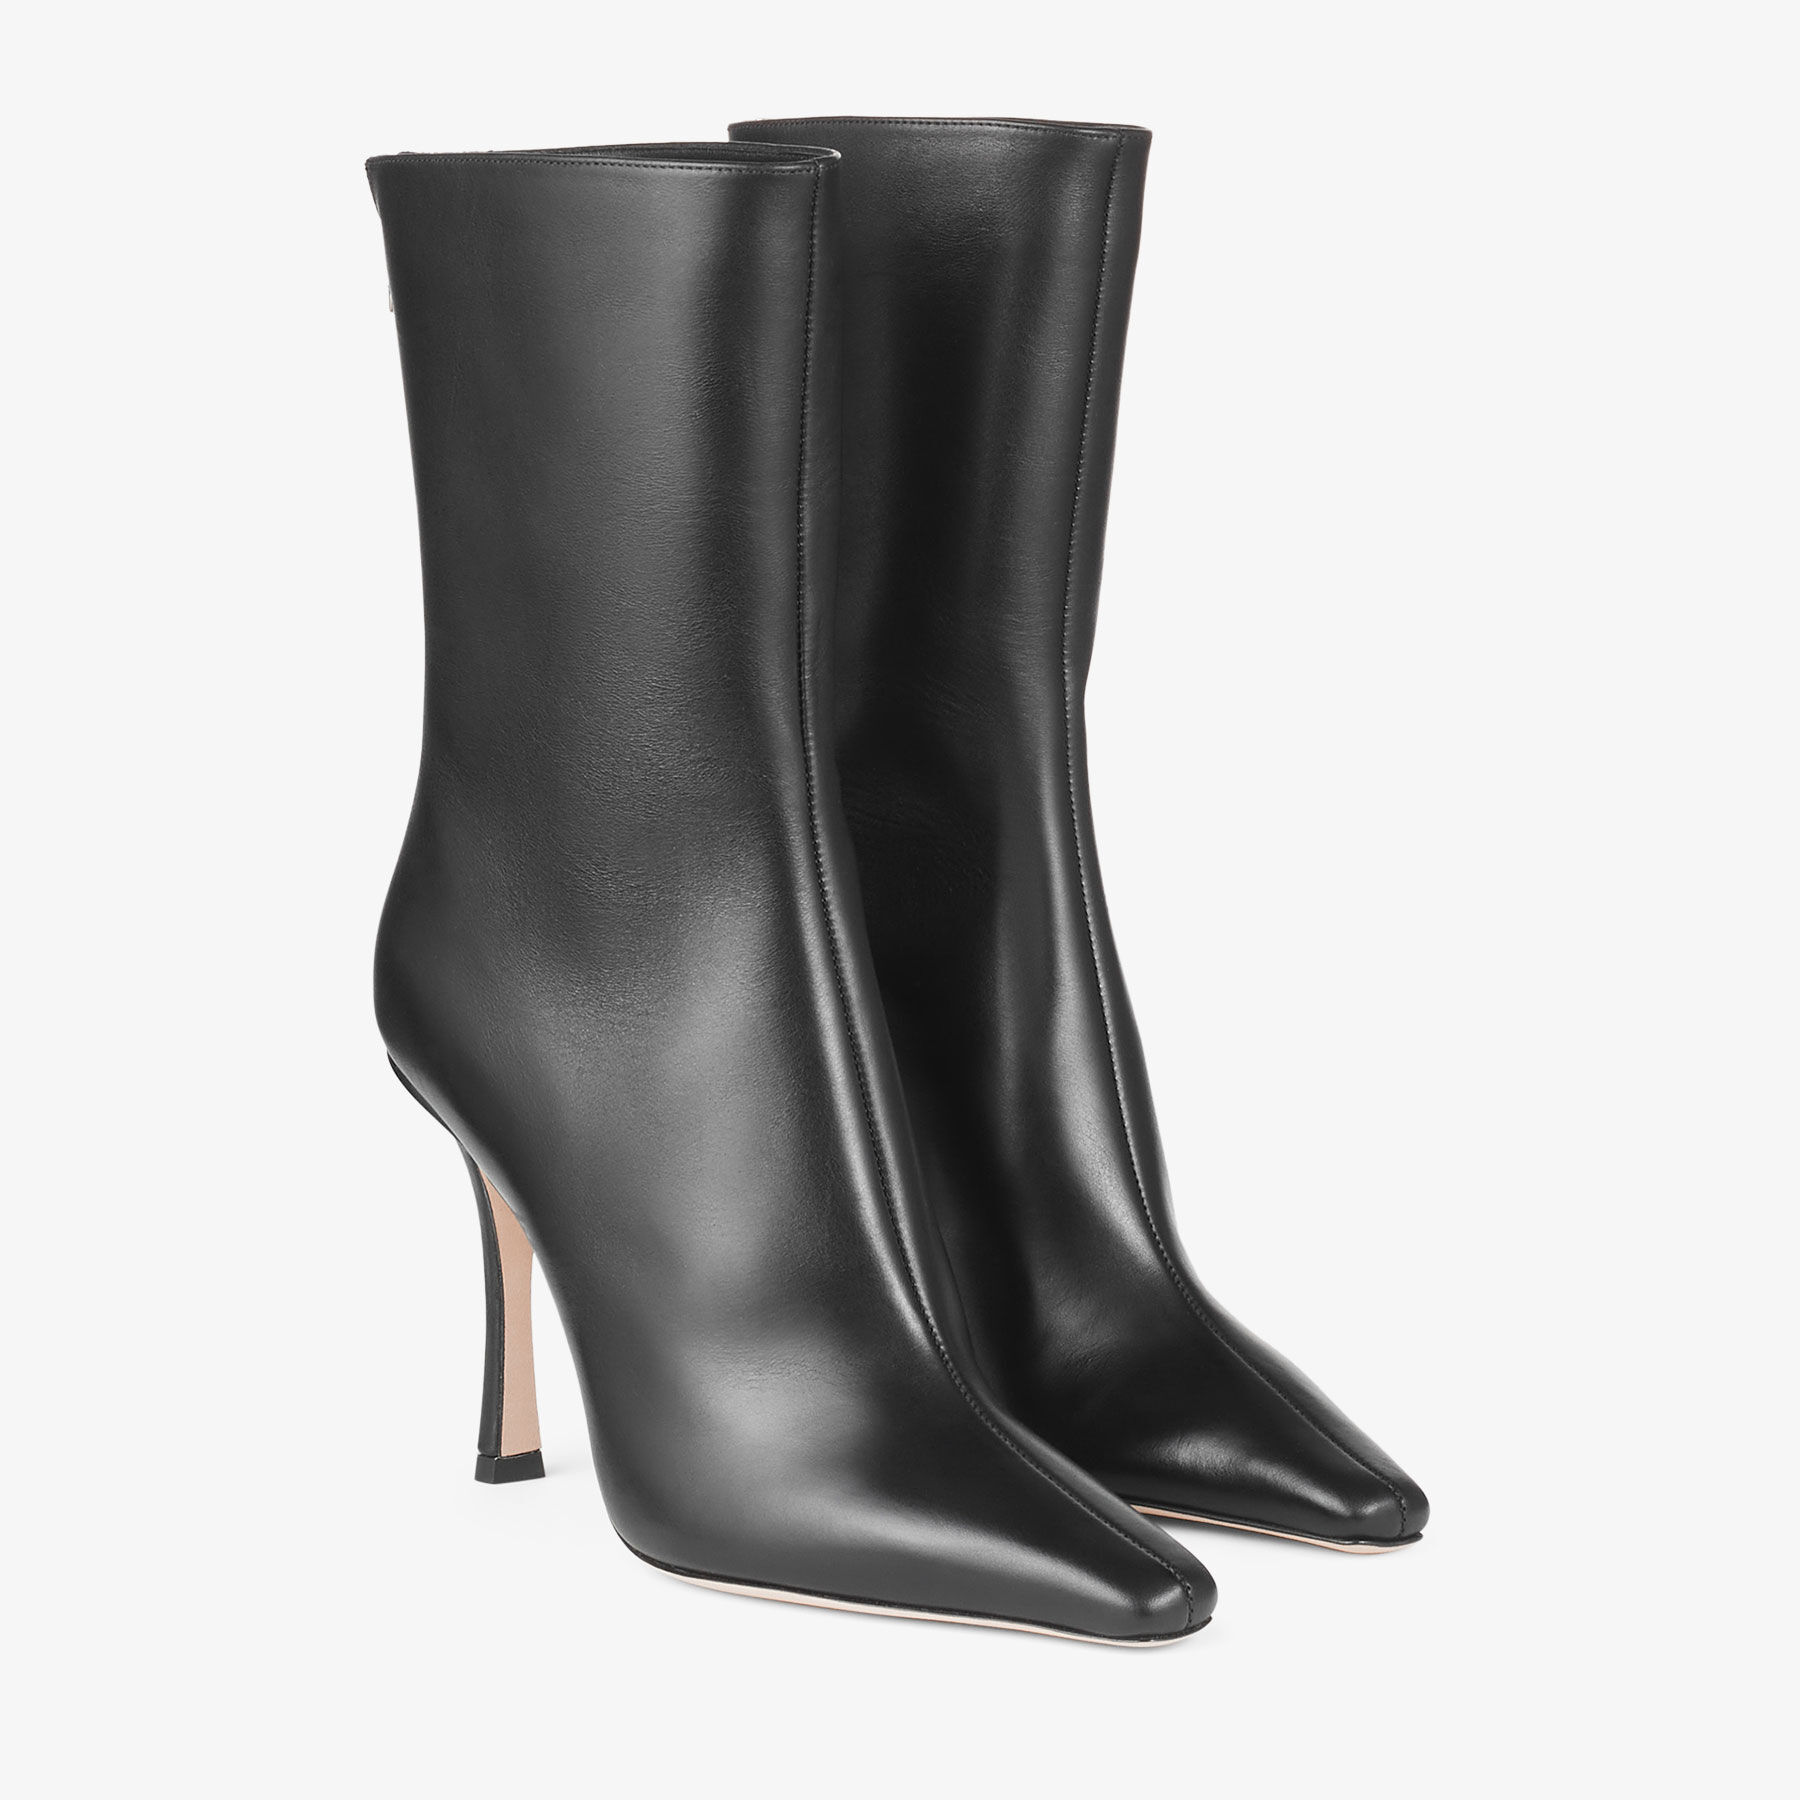 AGATHE AB 100 | Black Calf Leather Ankle Boots | Autumn Collection